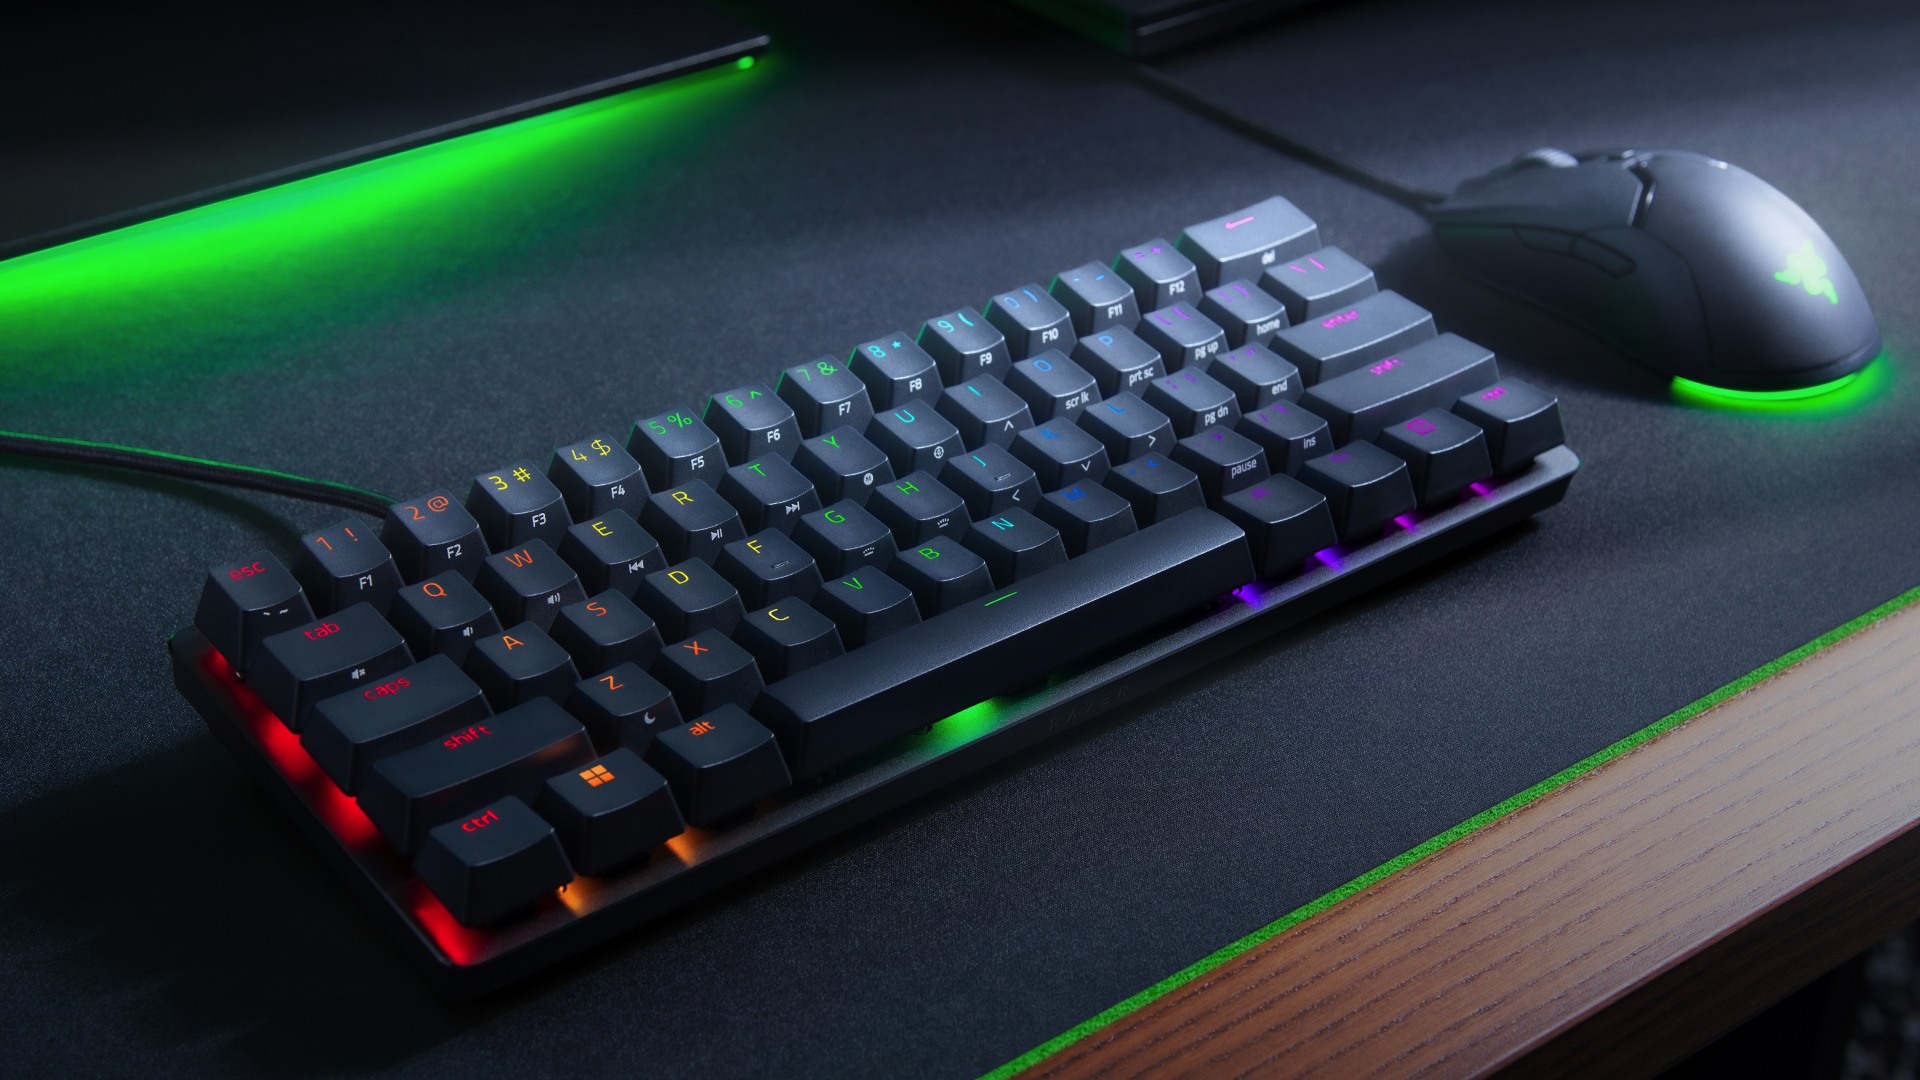 Razer Goes Crazy, Adds Analog Optical Switches to Compact Gaming Keyboard